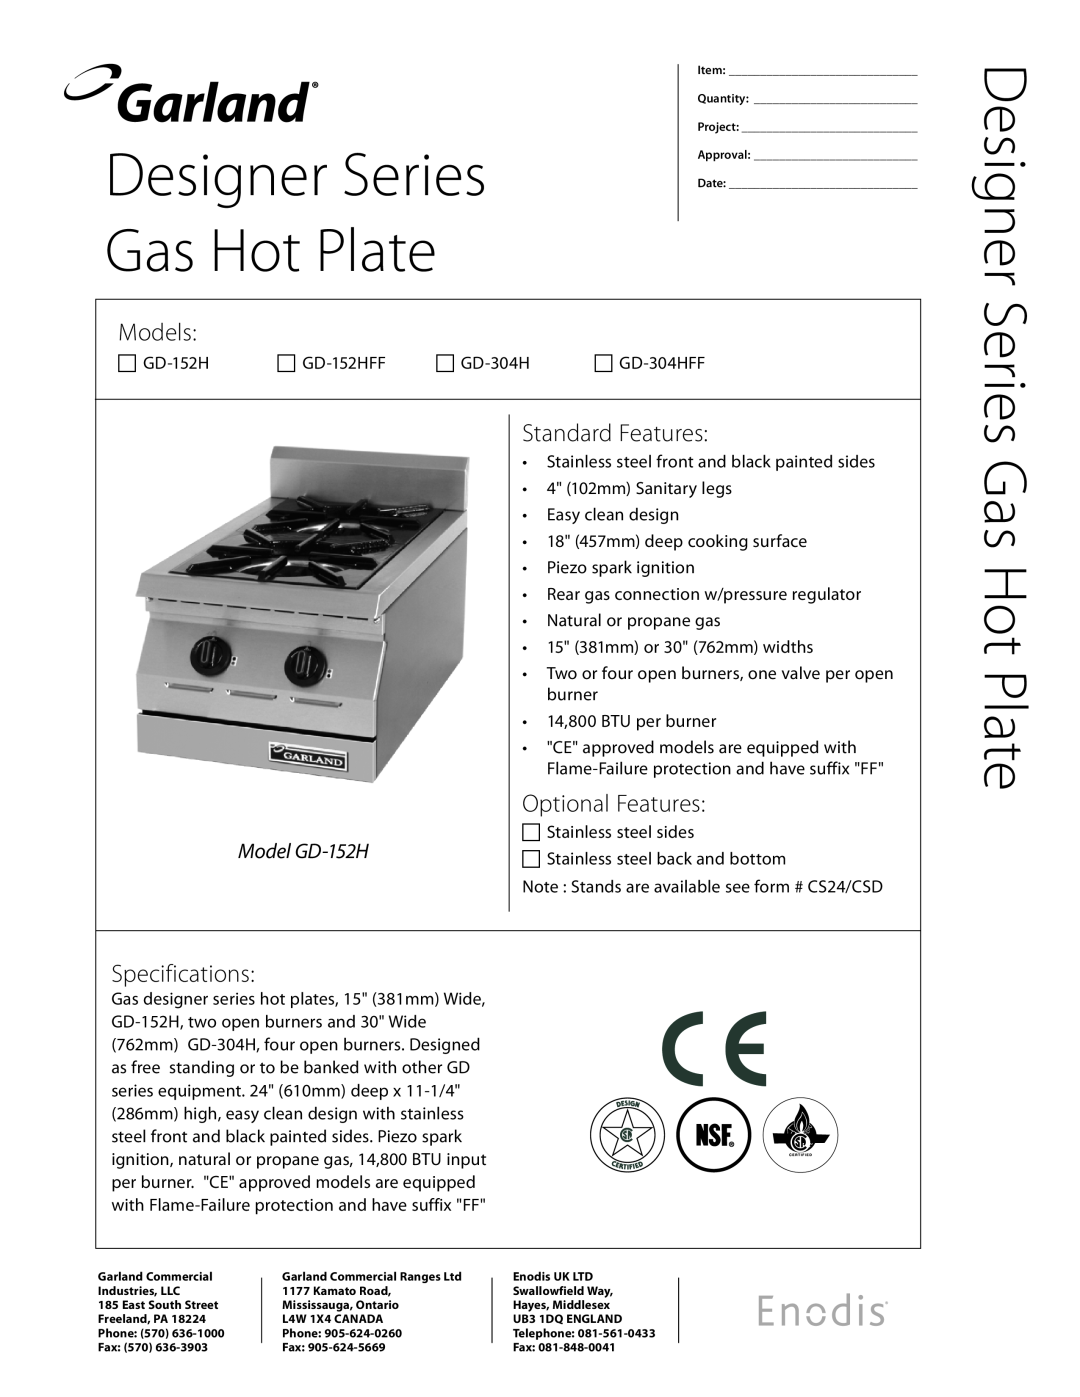 Garland GD-152HFF, GD-304H specifications Designer Series Gas Hot Plate, Models, Standard Features, Optional Features 